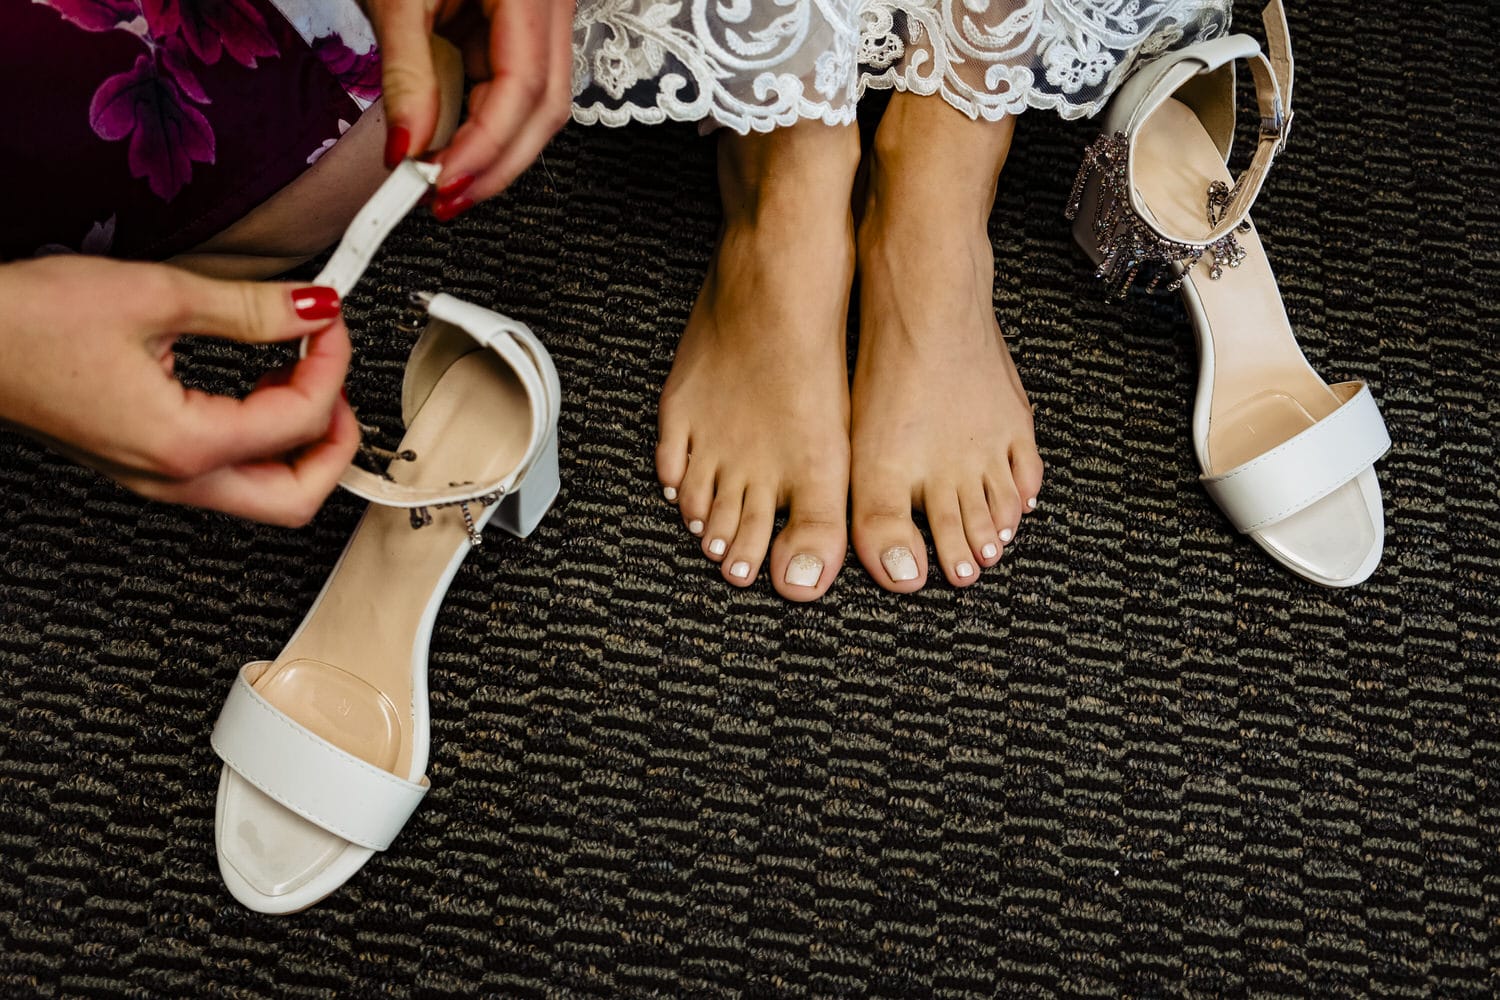 A candid, colorful picture of a woman's feet, a pair of hands getting ready to put shoes on the feet. 